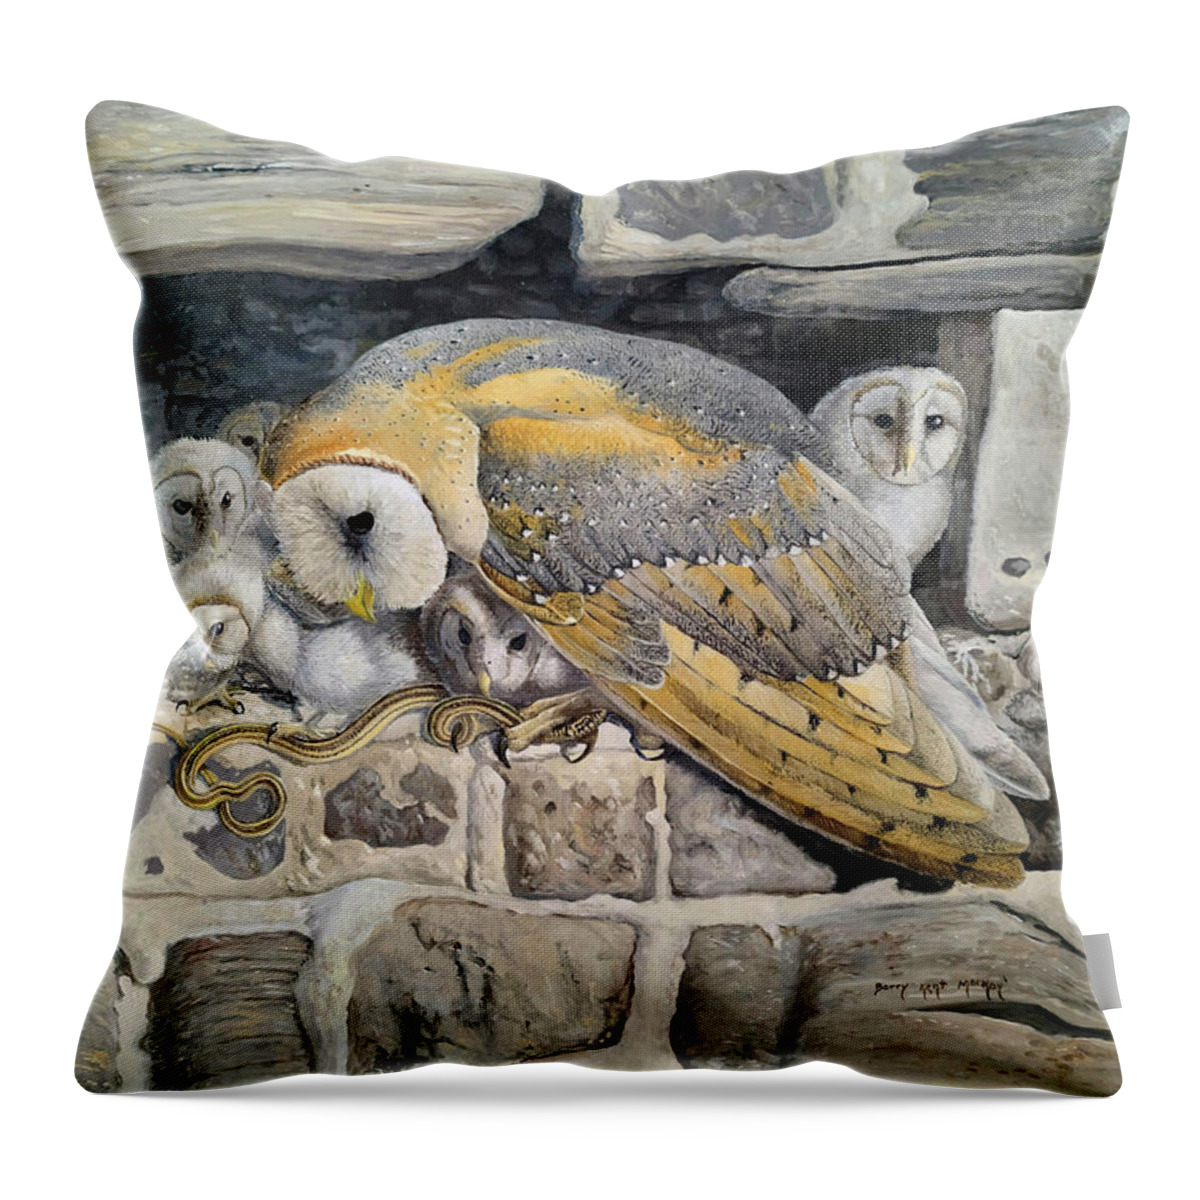 Barn Owl Throw Pillow featuring the painting Barn Owl Family by Barry Kent MacKay